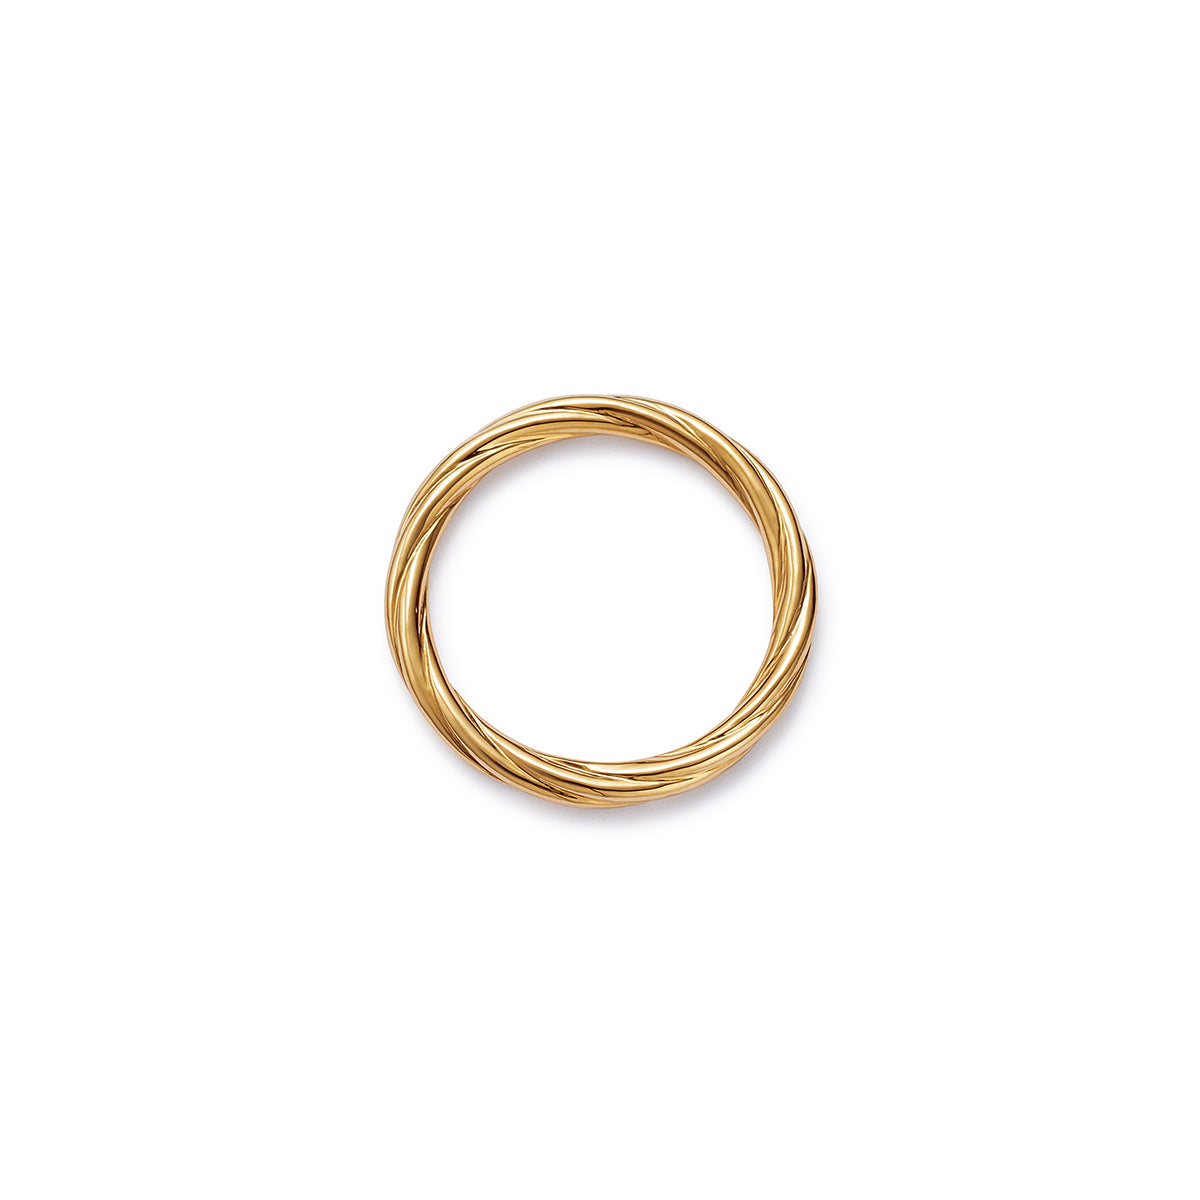 Mare | Yellow Gold Stacking Ring / Stacking Band by FUTURA